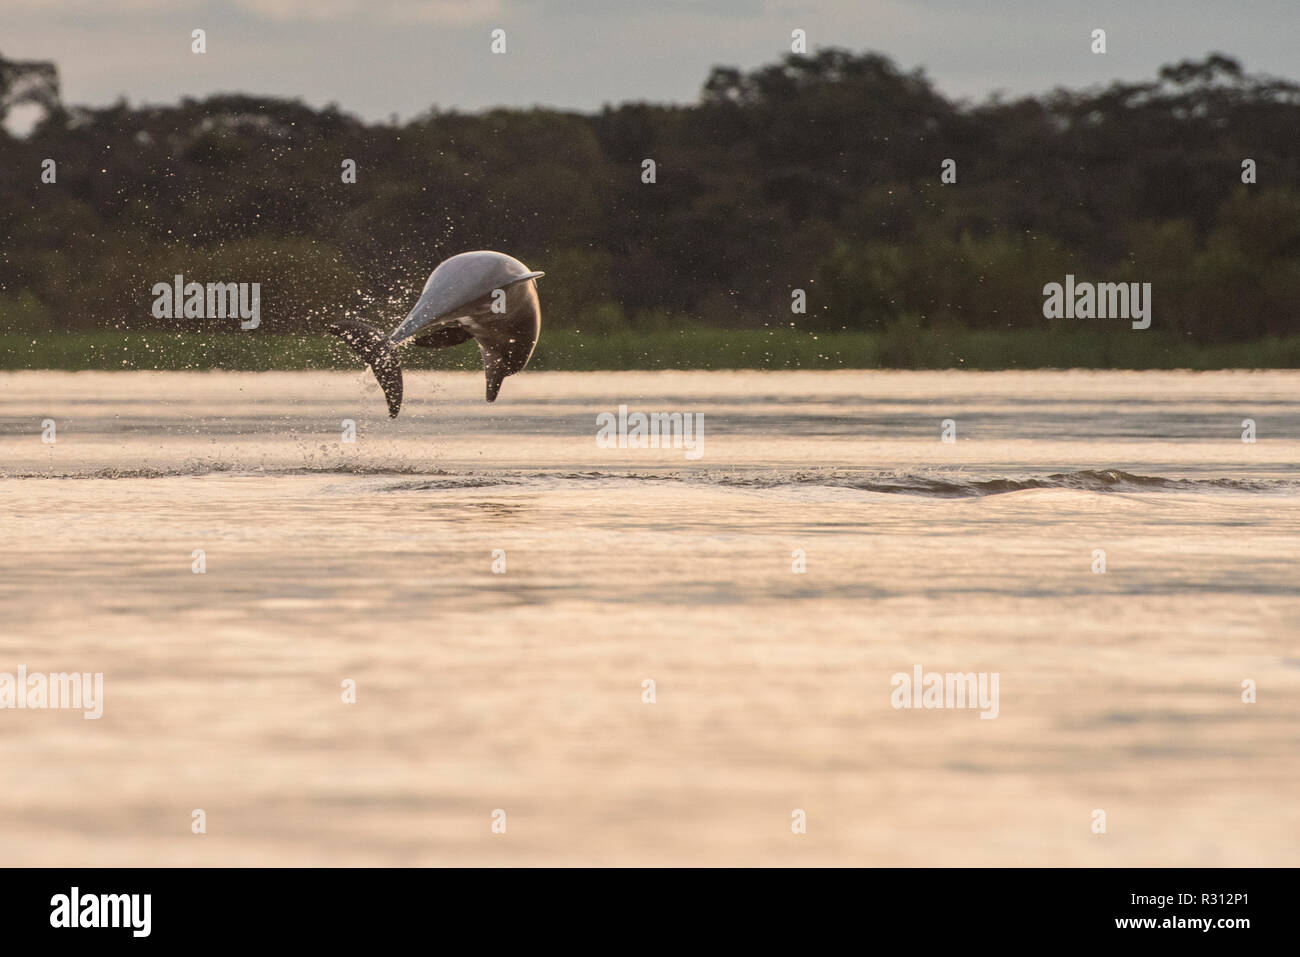 An amazon freshwater dolphin also known as the Tucuxi (Sotalia fluviatilis) jumps out of the amazon river at sunset. Stock Photo